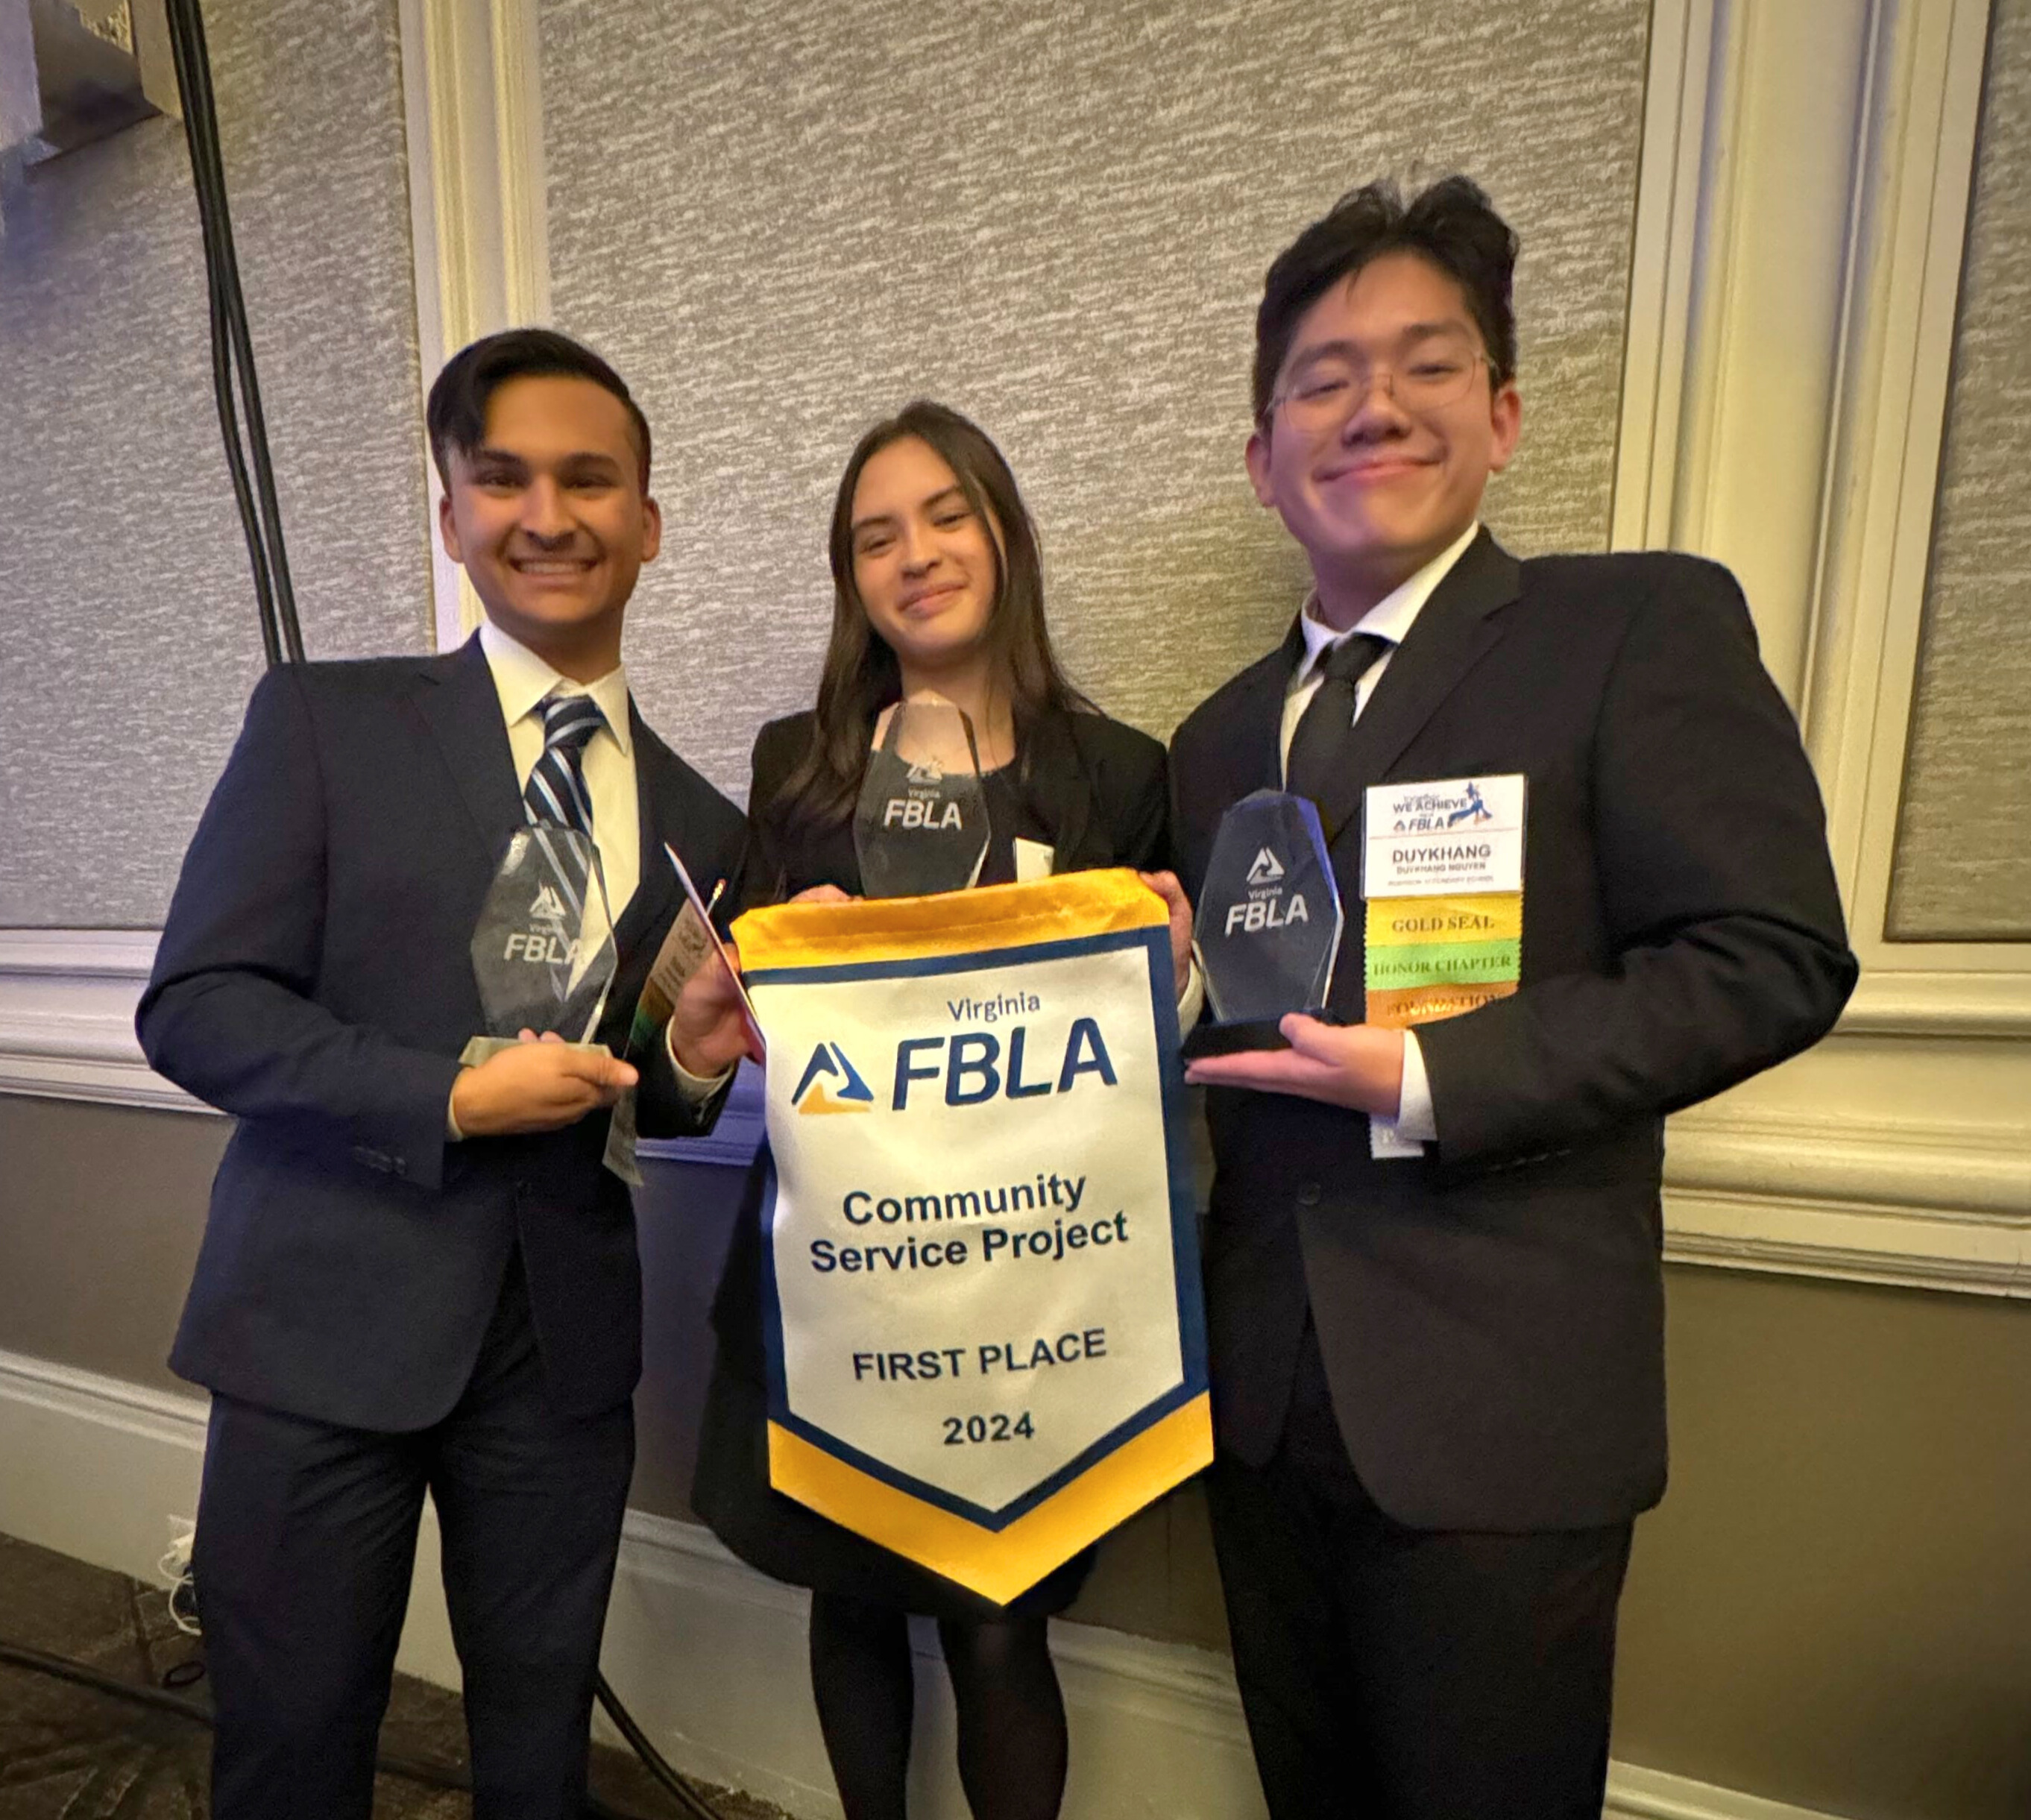 Robinson SS students and FBLA winners Shaan, Carmela, and DK (Duykhang)